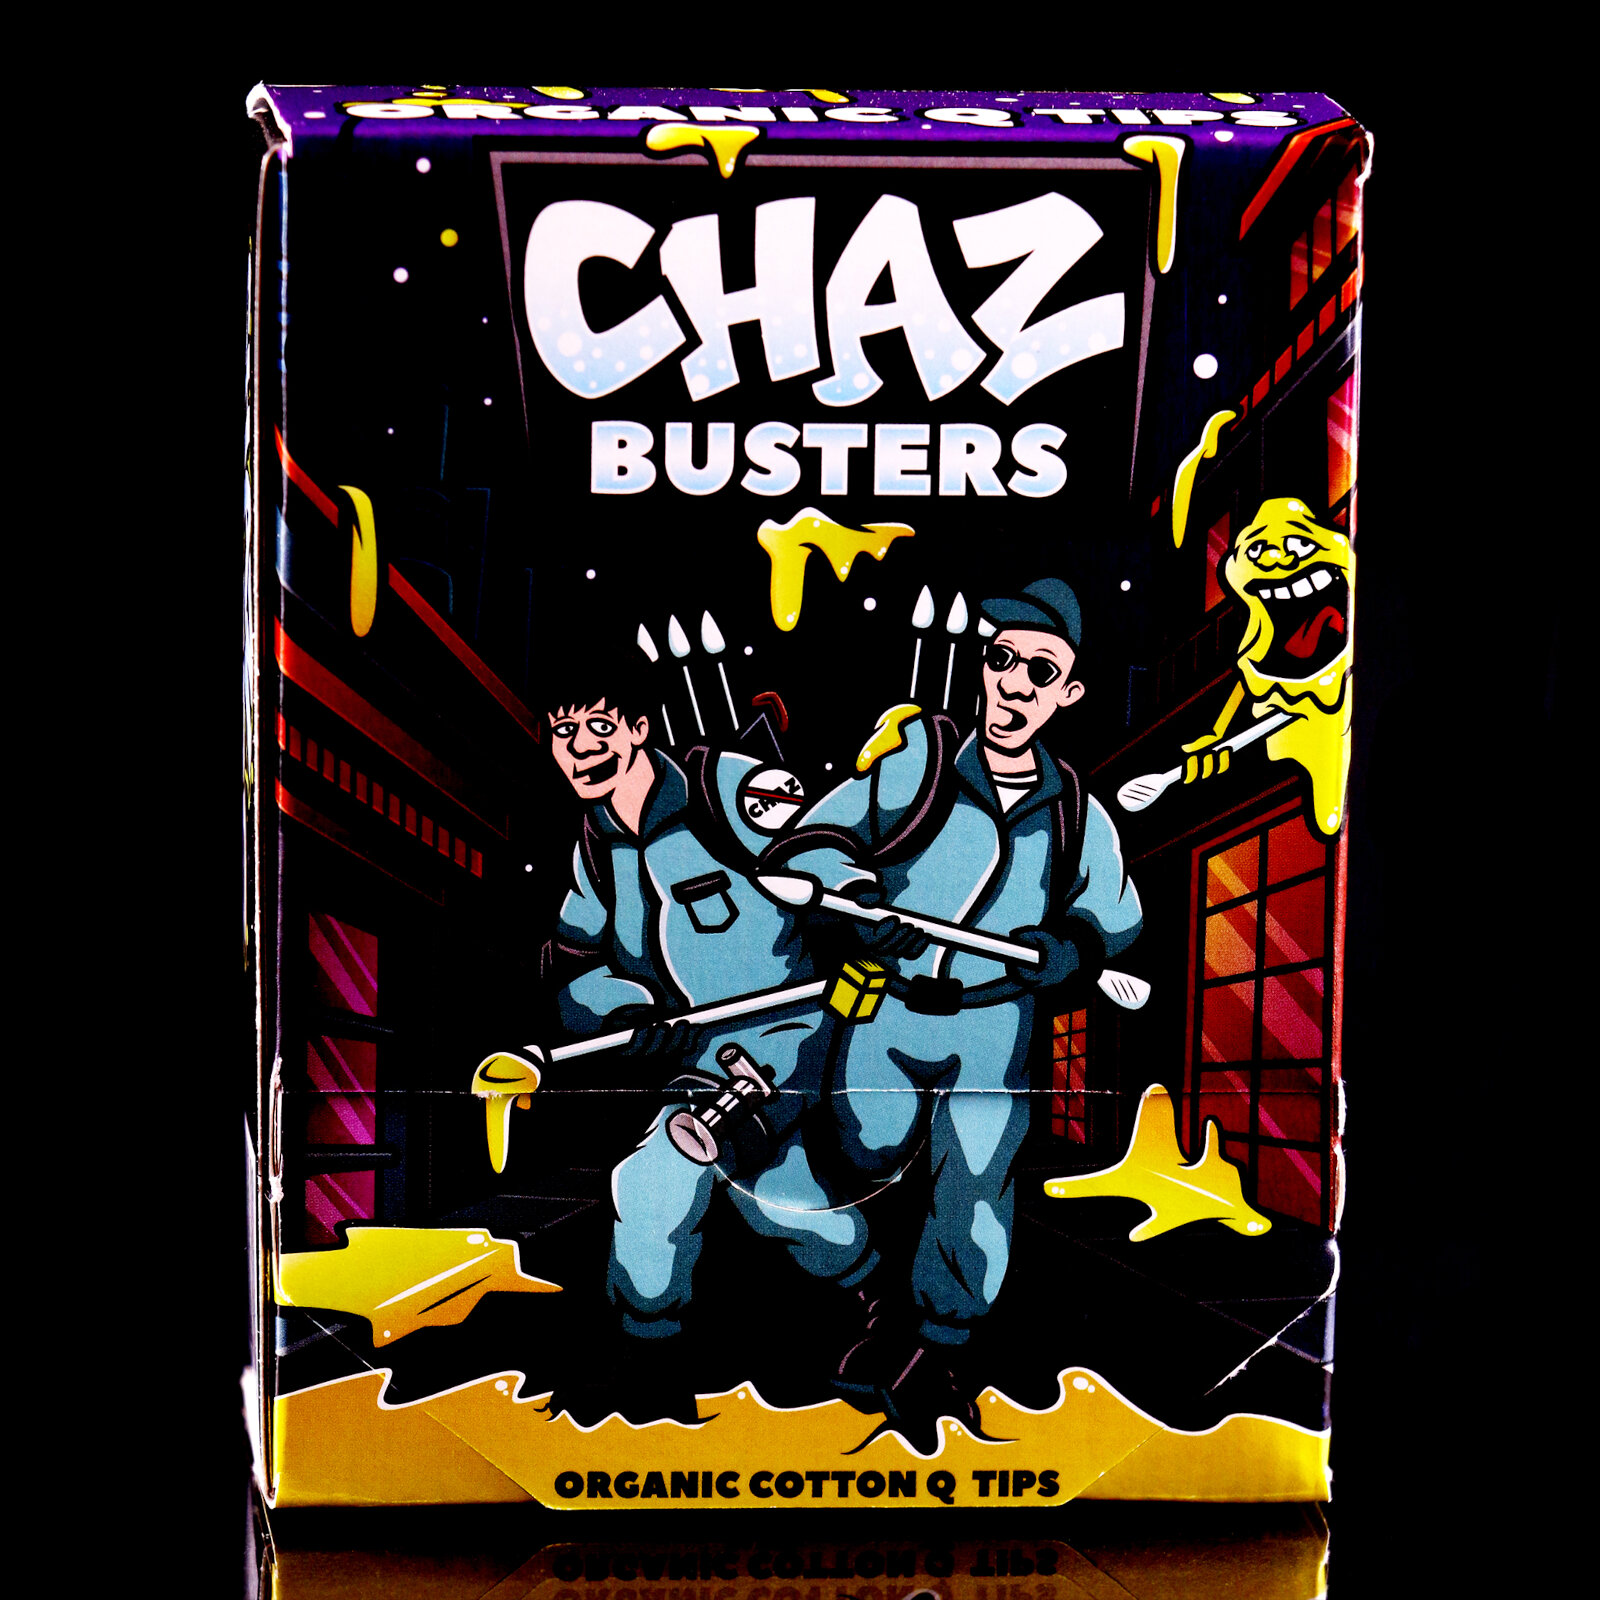 Chaz Busters